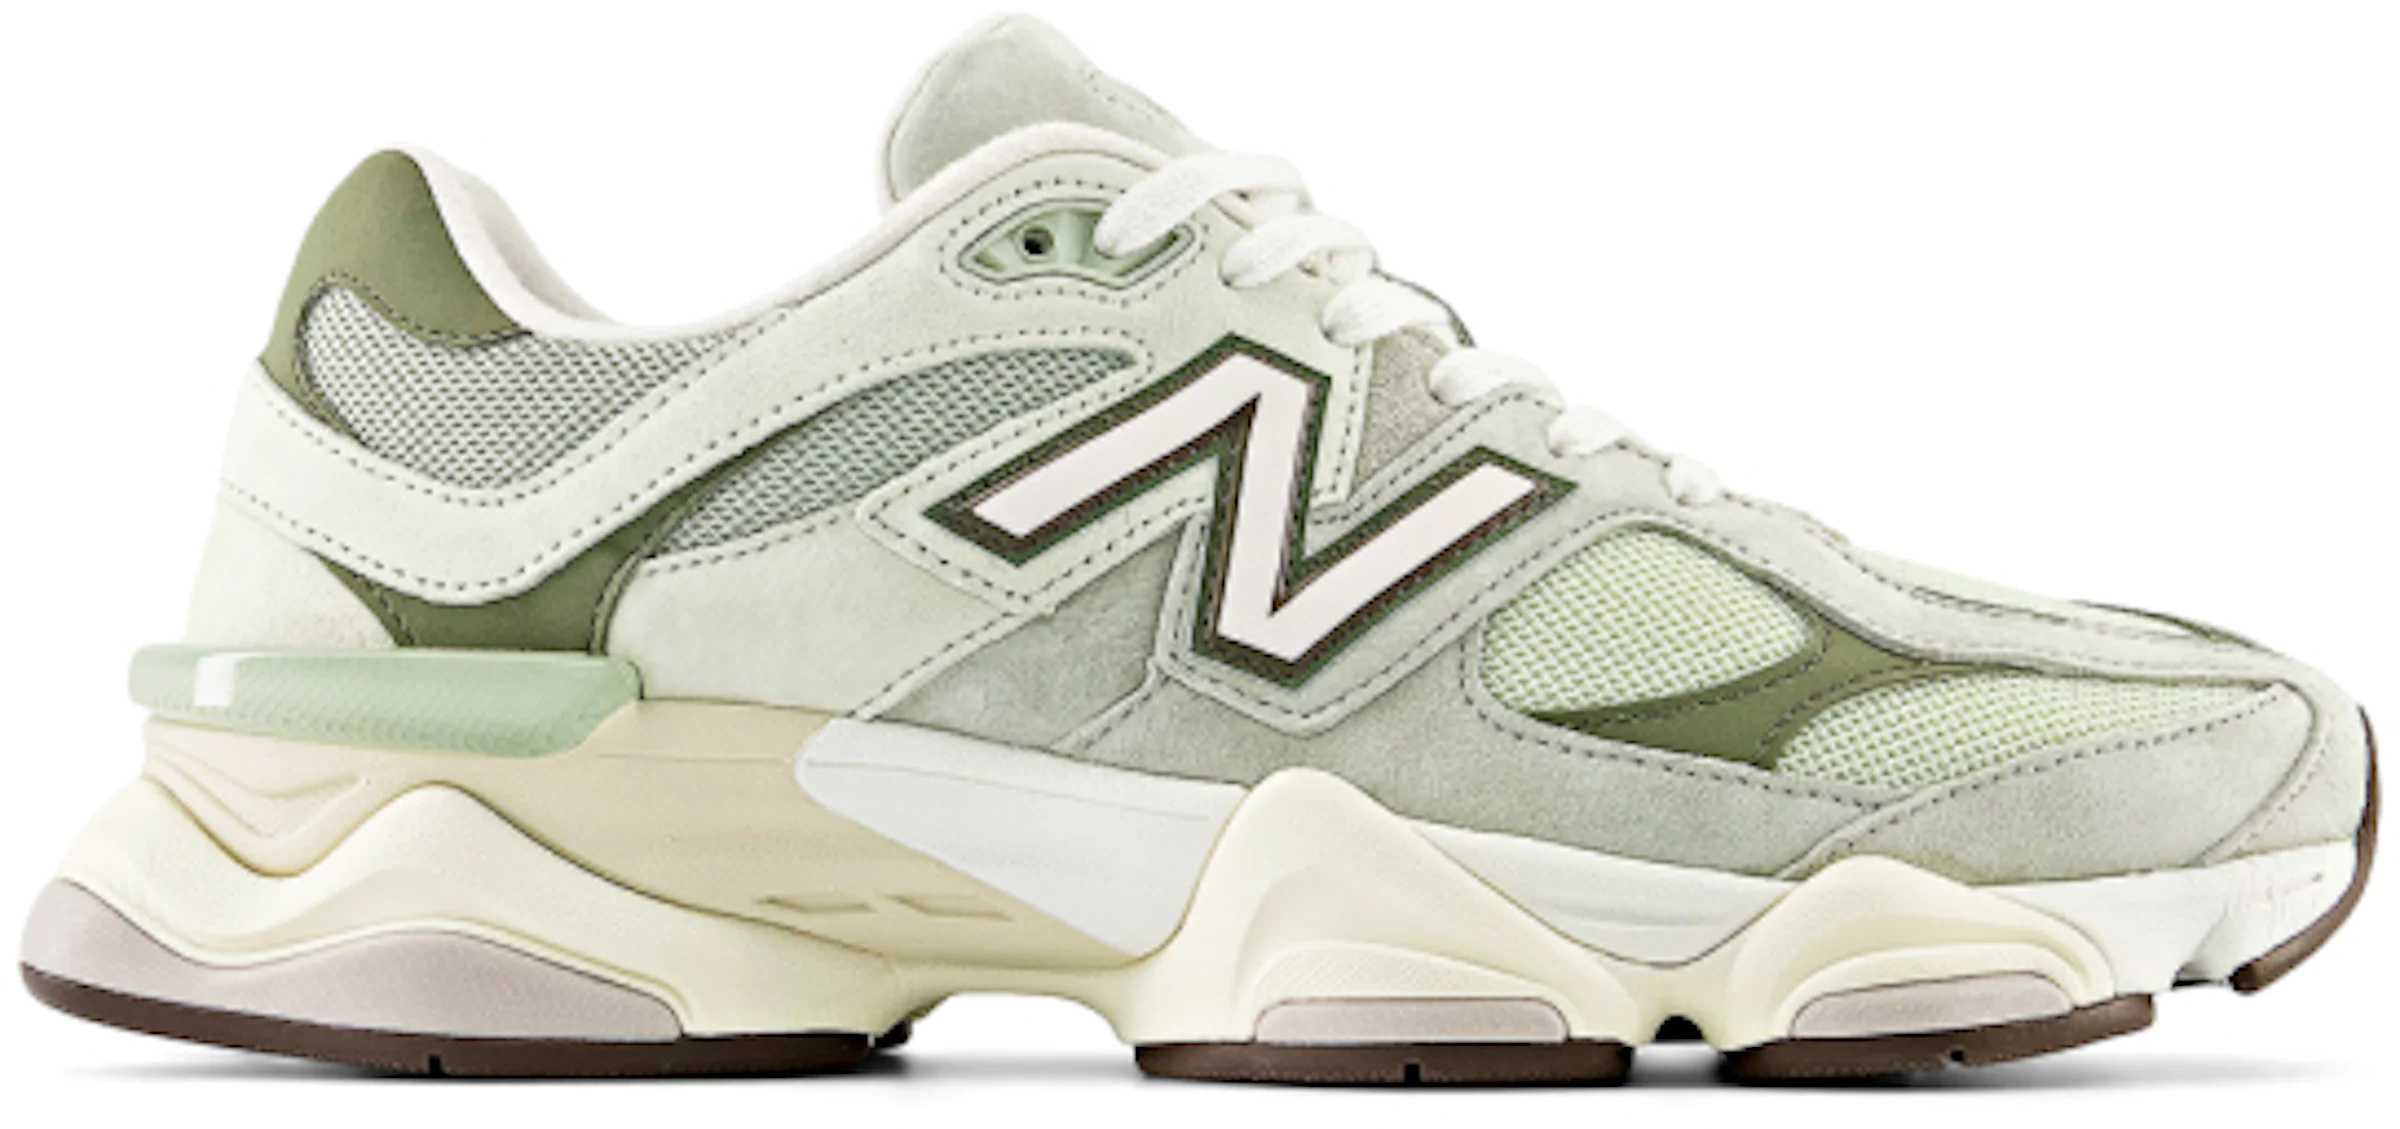 Men's sneakers and shoes New Balance 9060 Castlerock